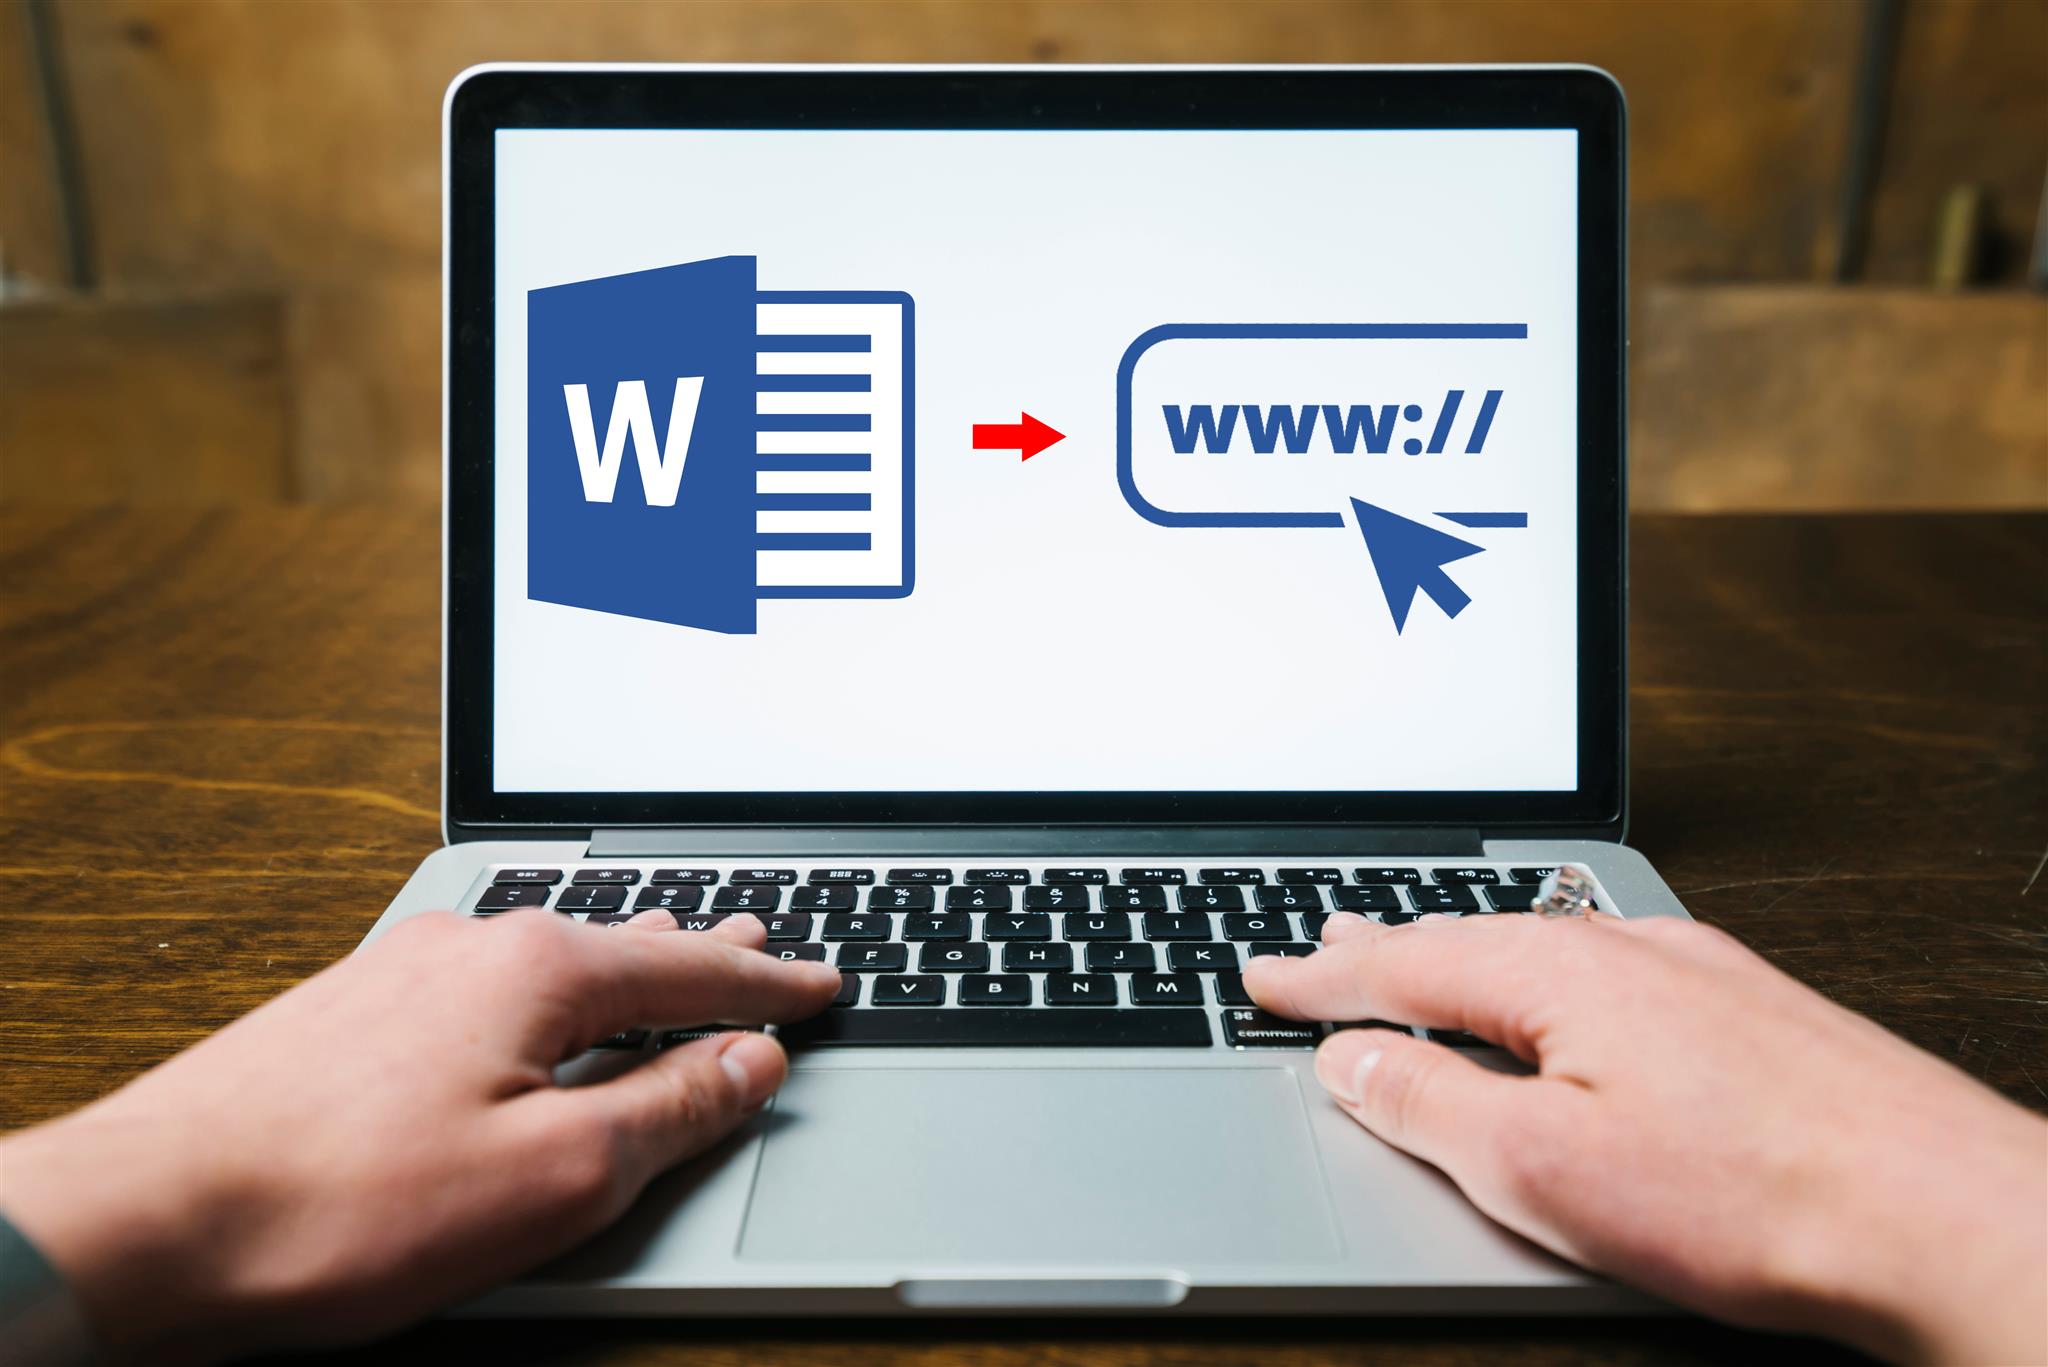 save-microsoft-word-document-as-a-web-page-nerds-shop